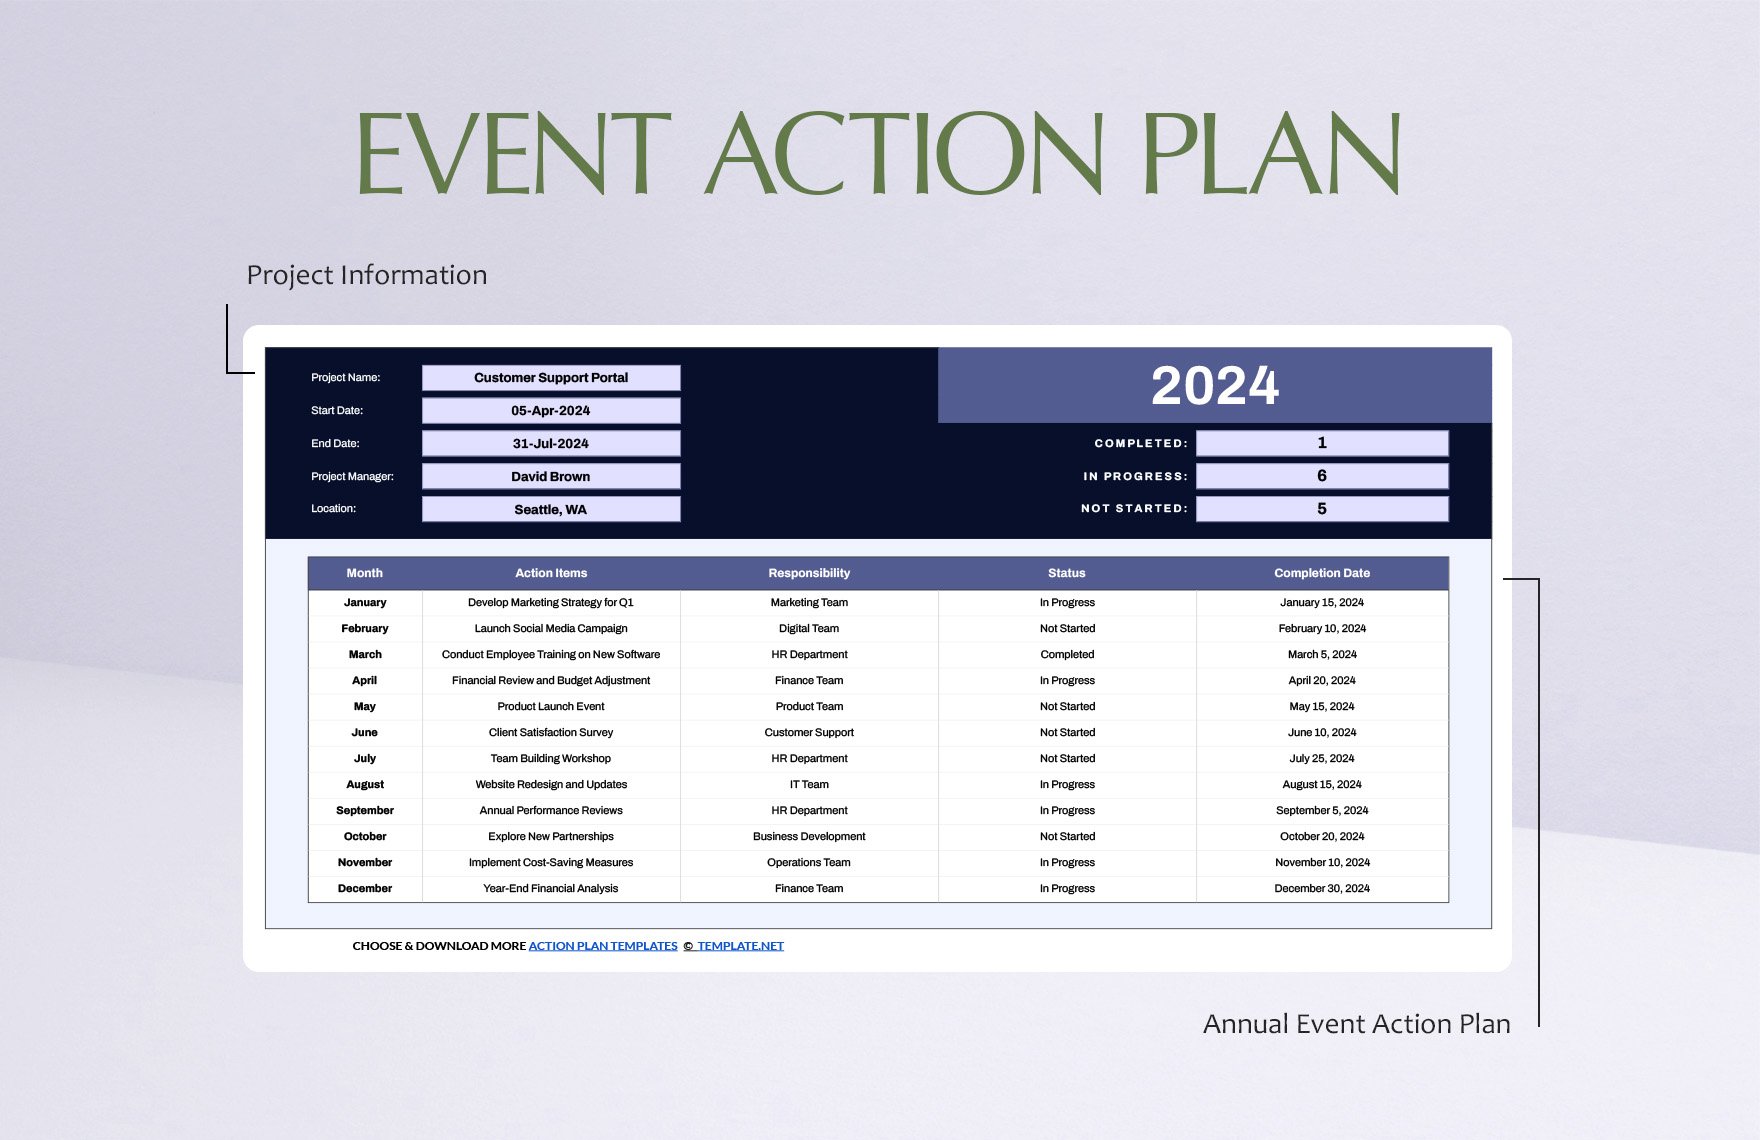 Yearly Action Plan Template